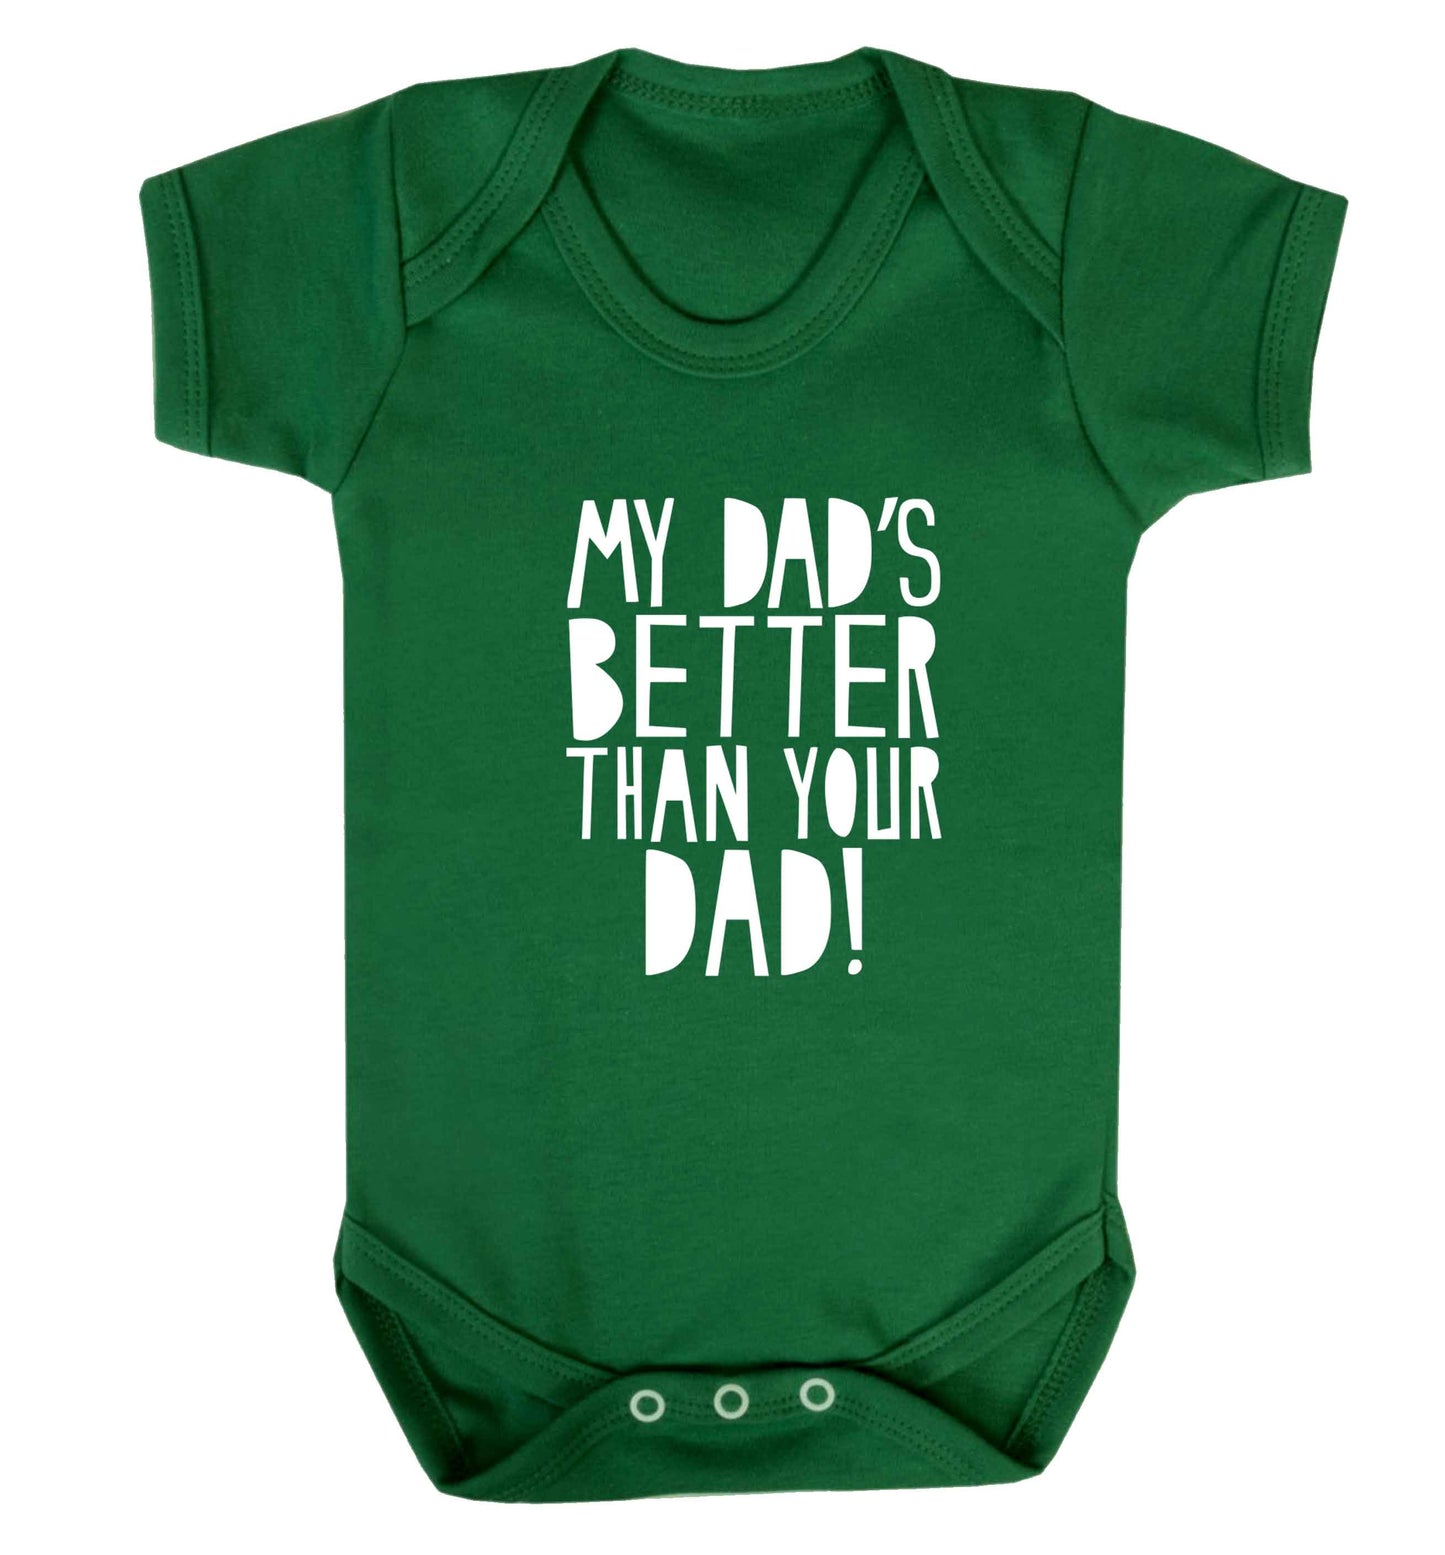 My dad's better than your dad! baby vest green 18-24 months